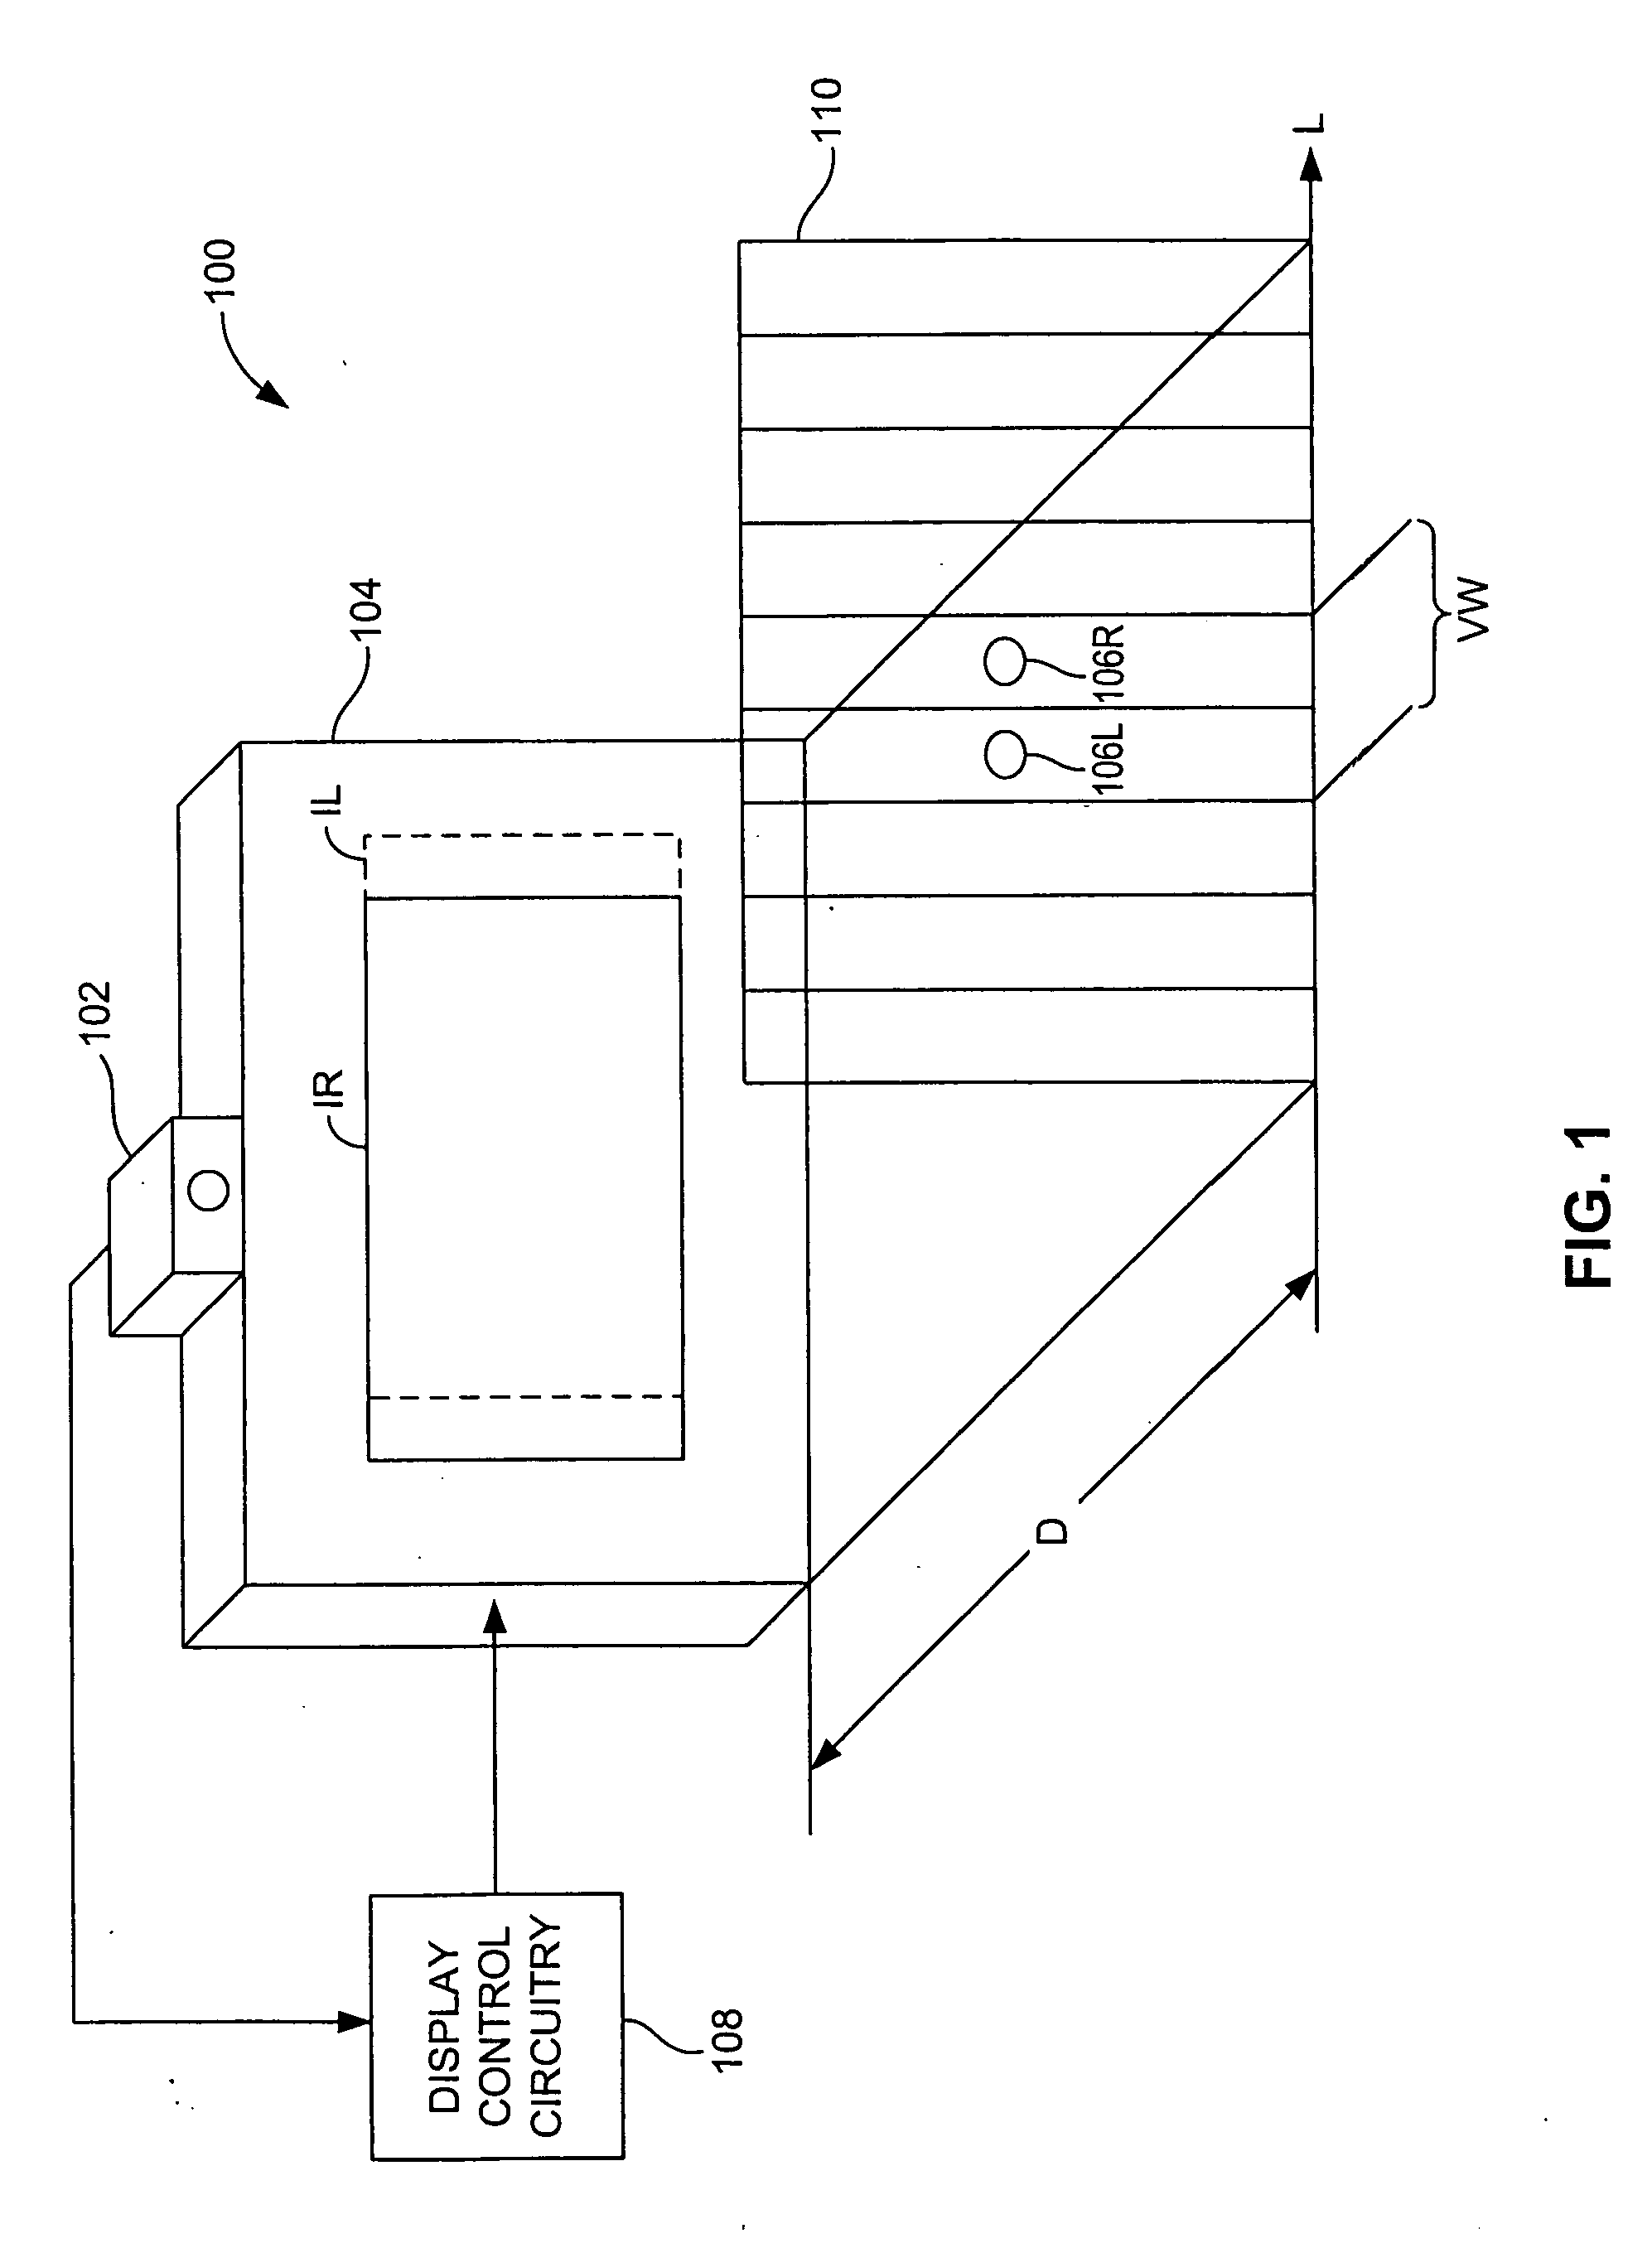 Eye detection system and method for control of a three-dimensional display